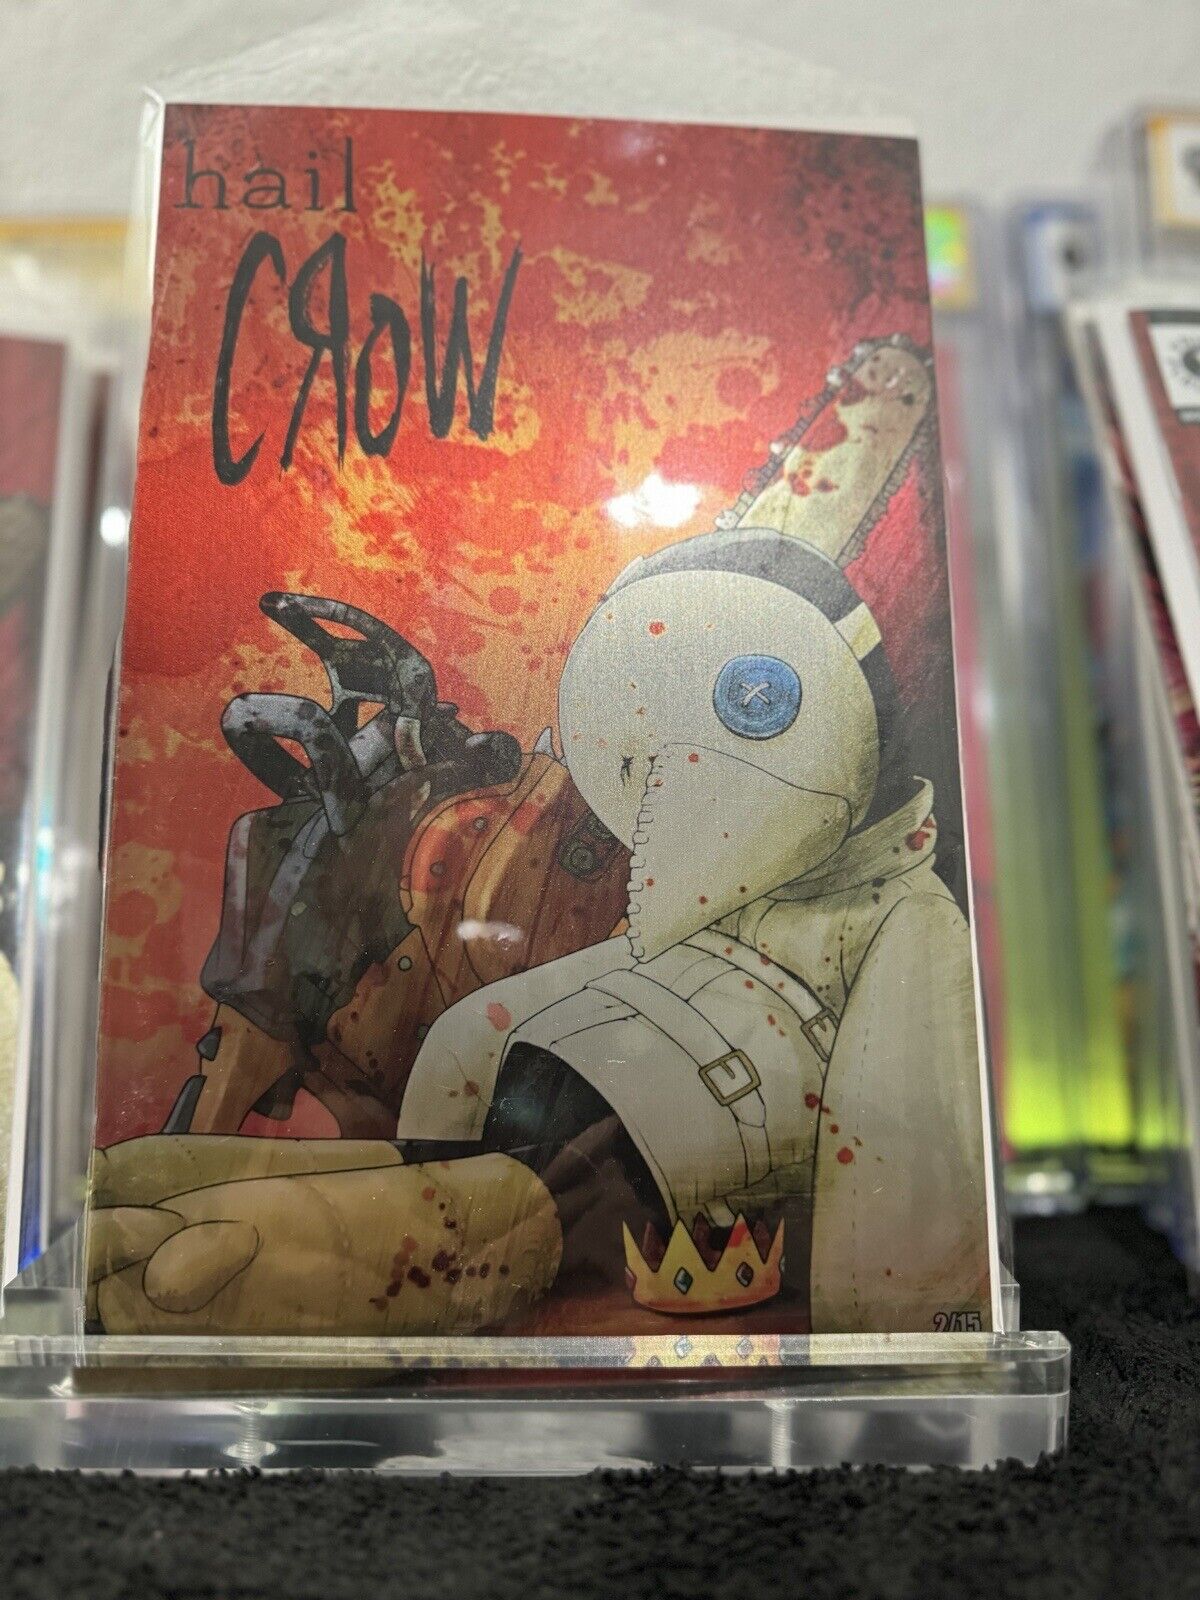 Hail Crow #1 KORN “Issues”  Chromium BLOODY METAL Limited To 15